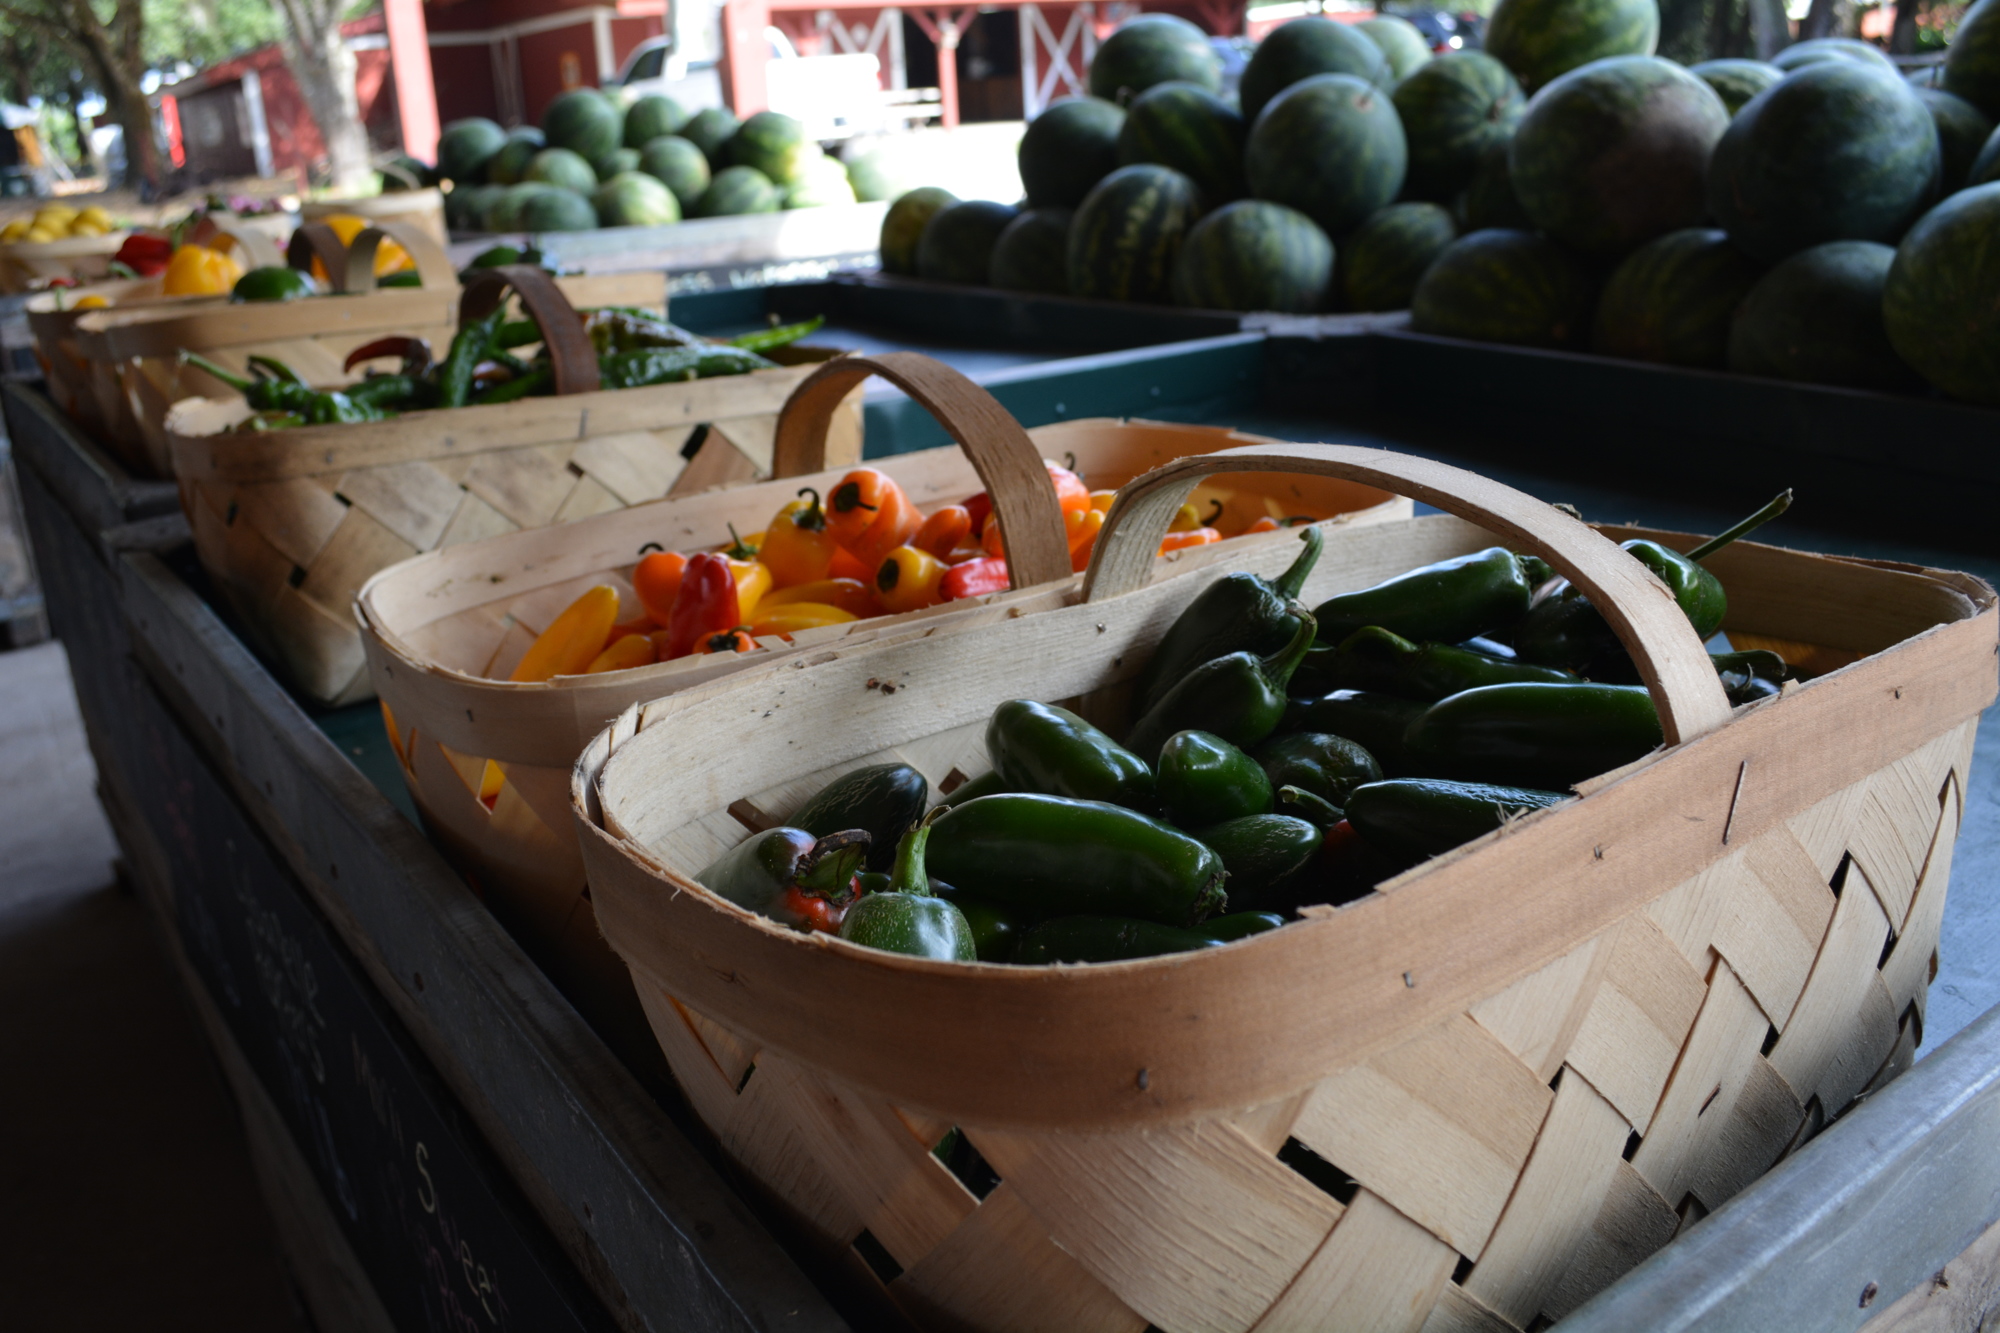 Festival-goers will be able to purchase fresh produce at the farm stand during the festival. U-pick opens in a few weeks.